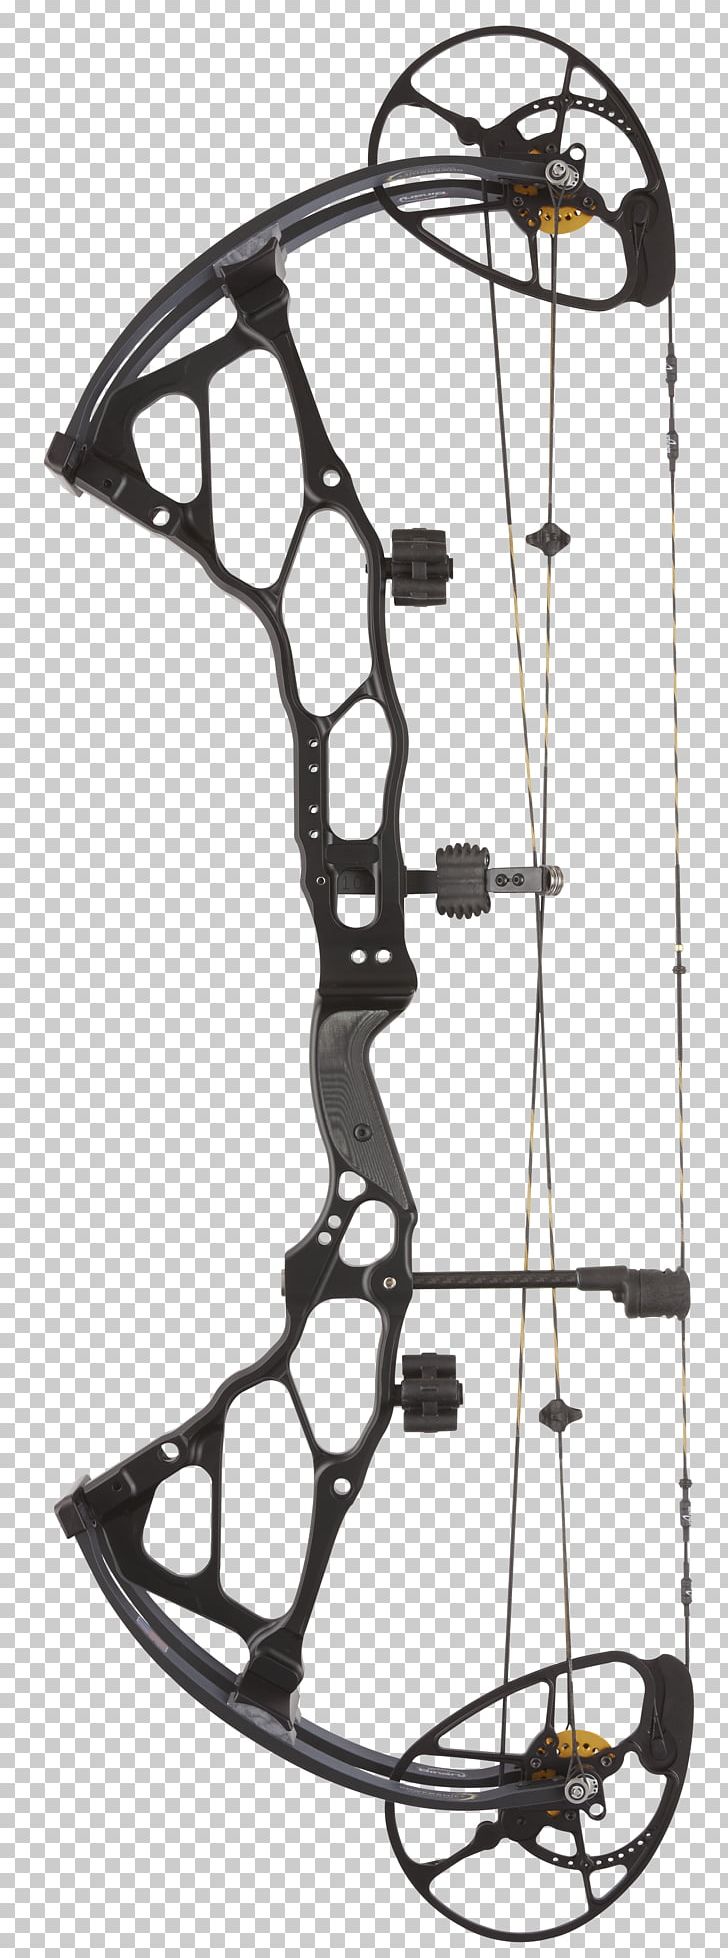 Bowhunting Compound Bows Bow And Arrow Archery PNG, Clipart, Archery, Binary Cam, Bow, Bow And Arrow, Bowhunting Free PNG Download